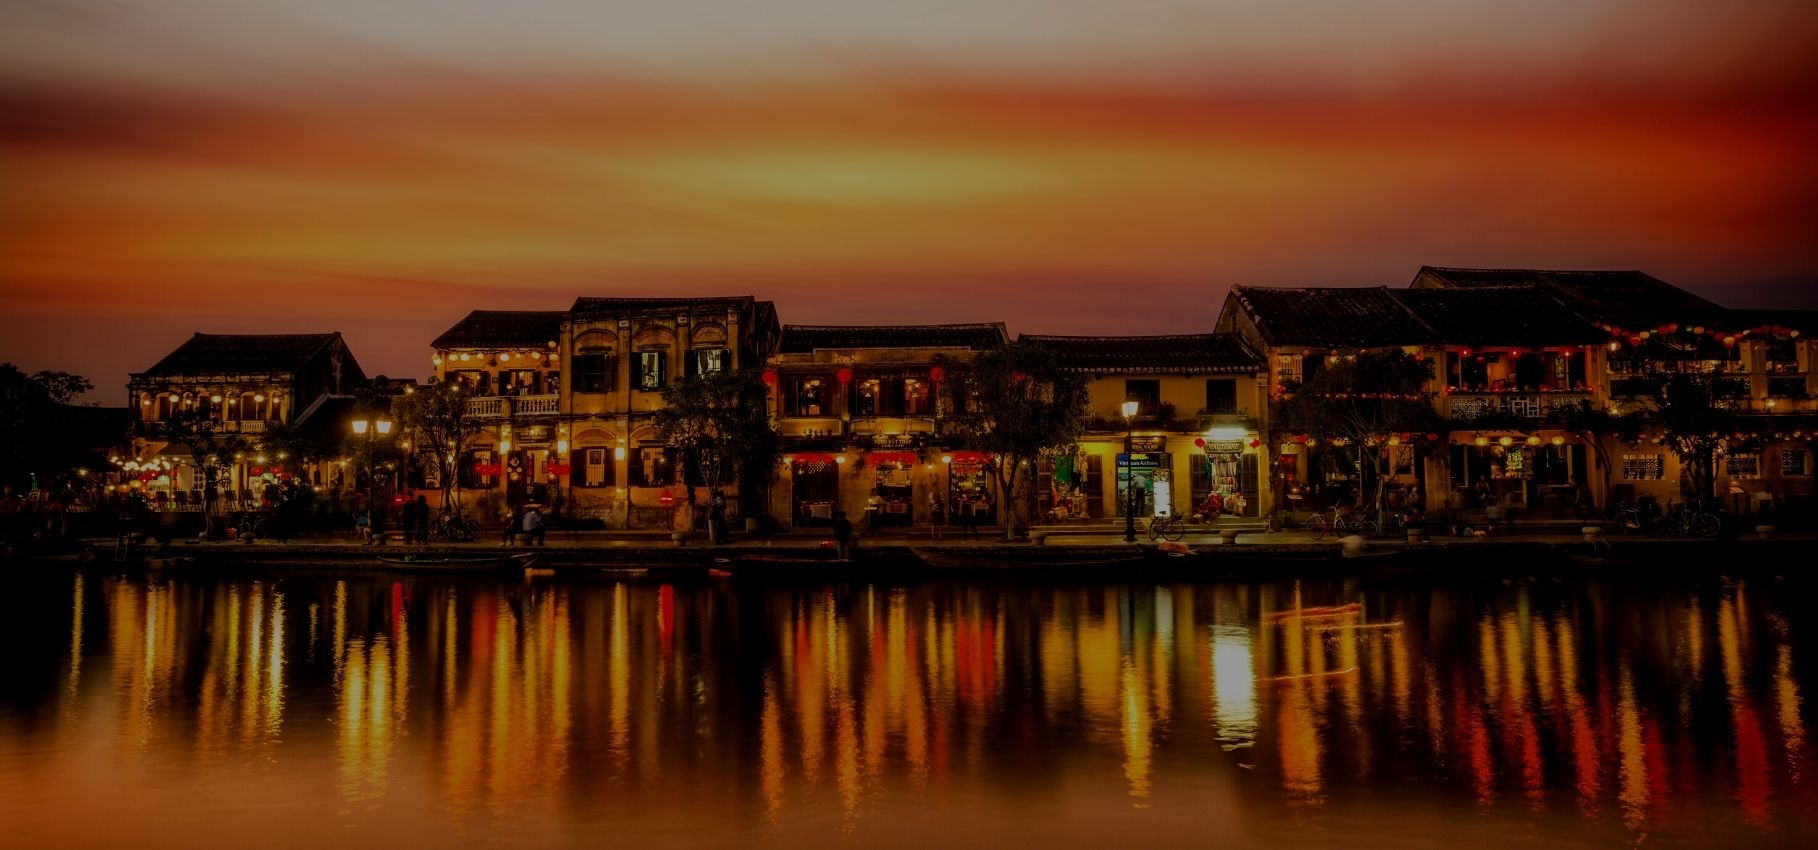 Best Things to do in Hoi An Ancient Town